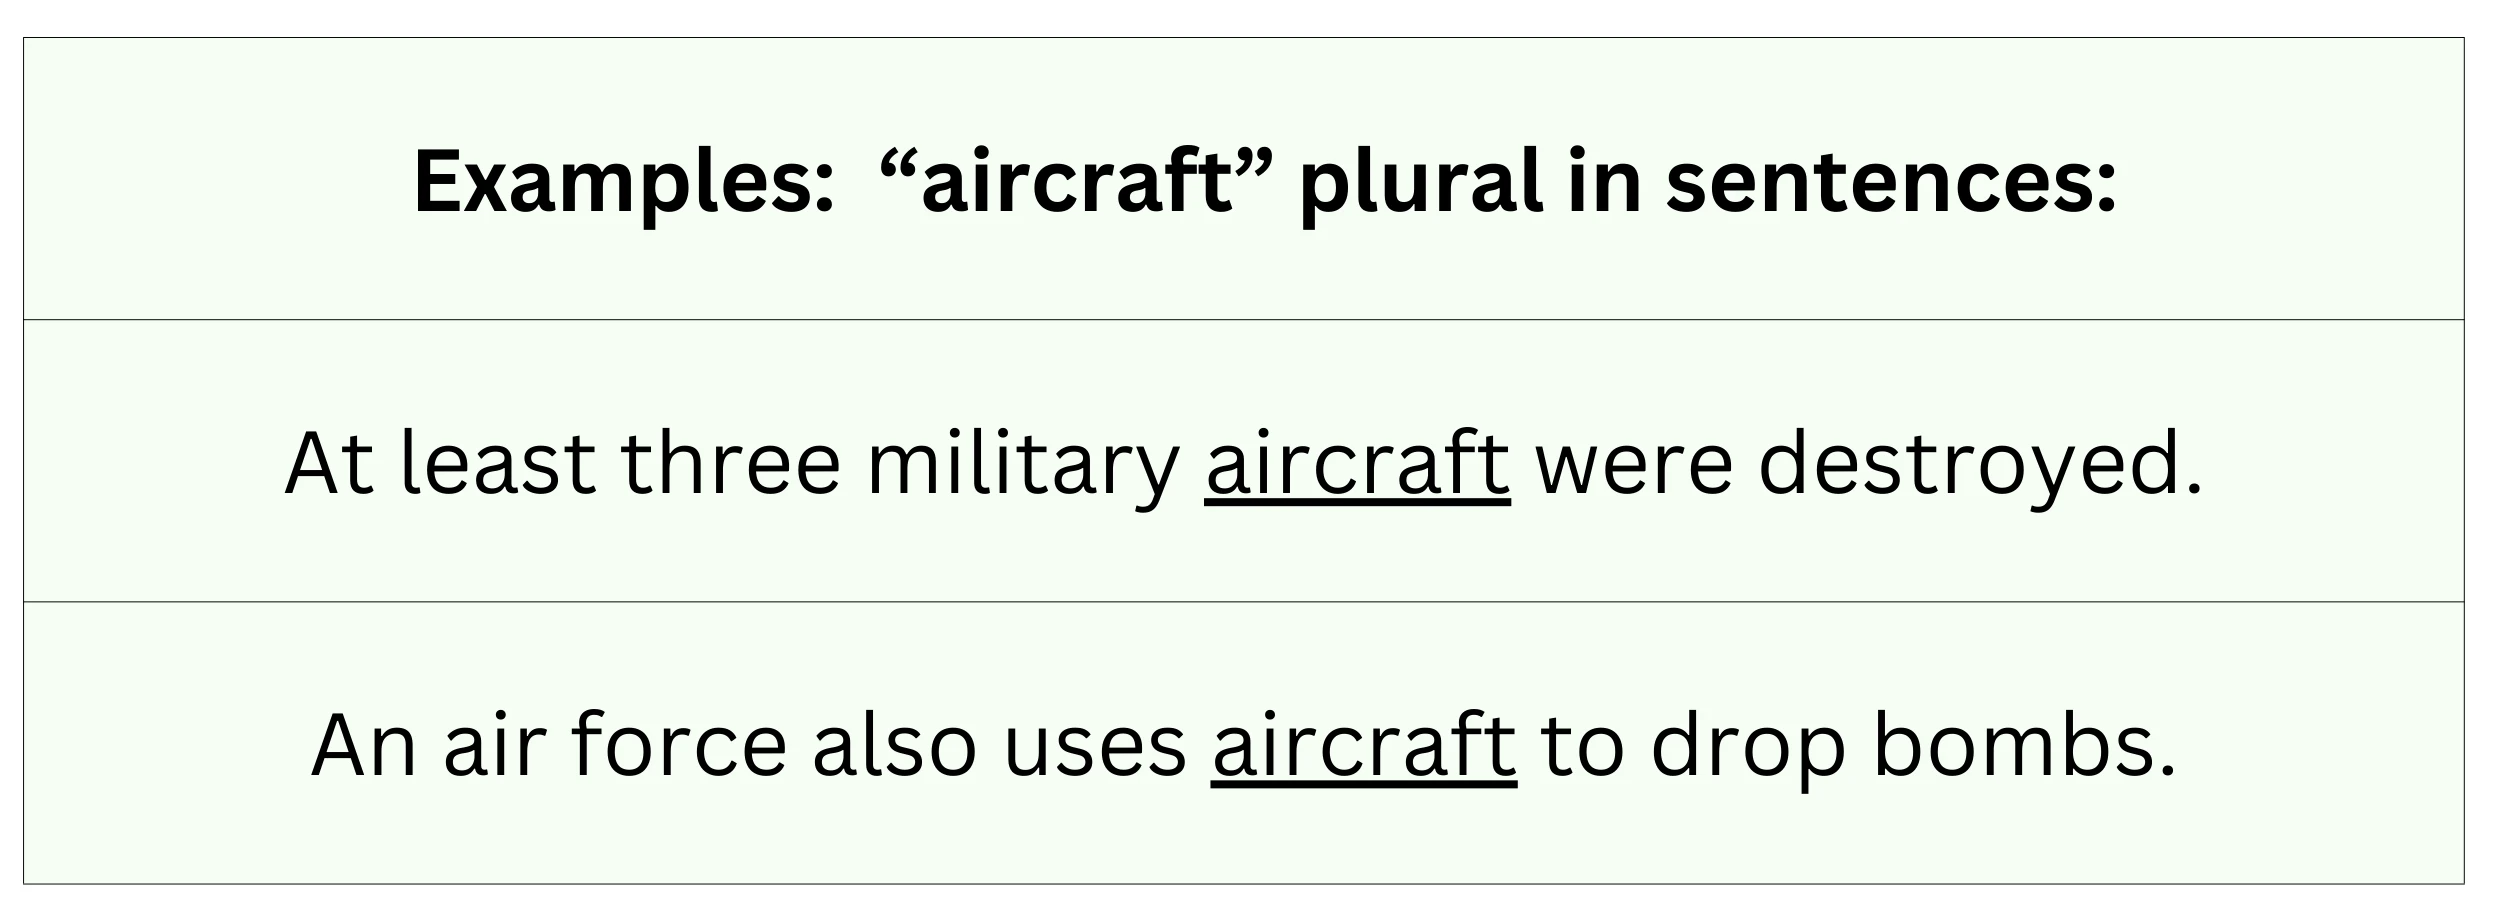 "Aircraft", plural, in sentence examples.